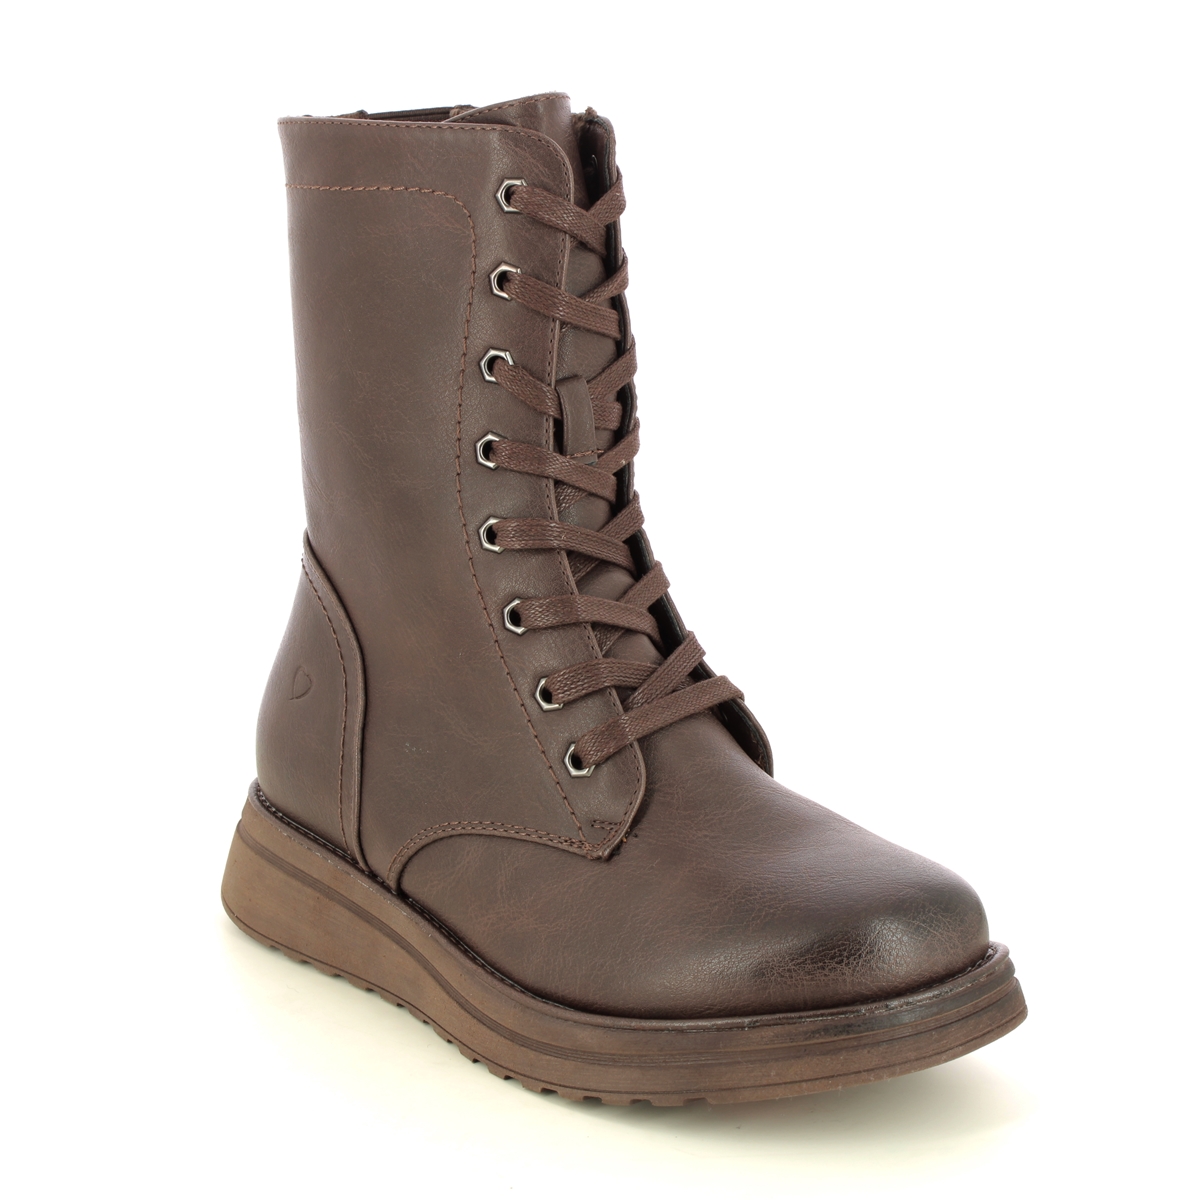 Heavenly Feet Martina Walker Chocolate brown Womens Lace Up Boots 3509-27 in a Plain Man-made in Size 4